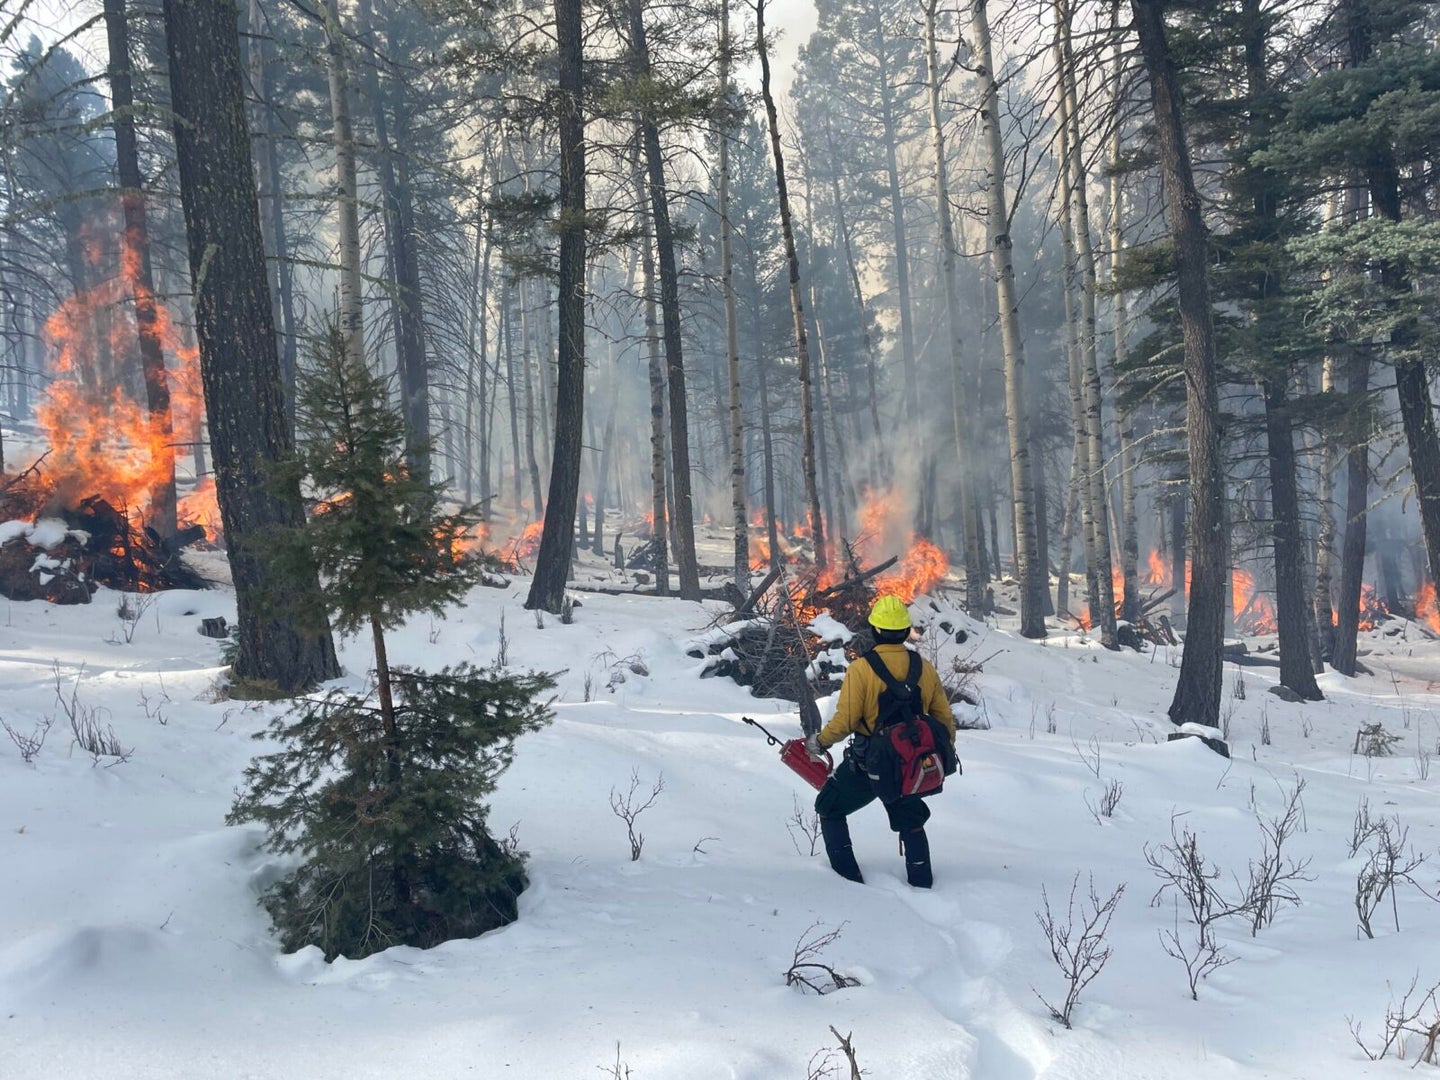 A firefighter stands holding a canister of gasoline in a snowy forest looking out over burning piles of underbrush.